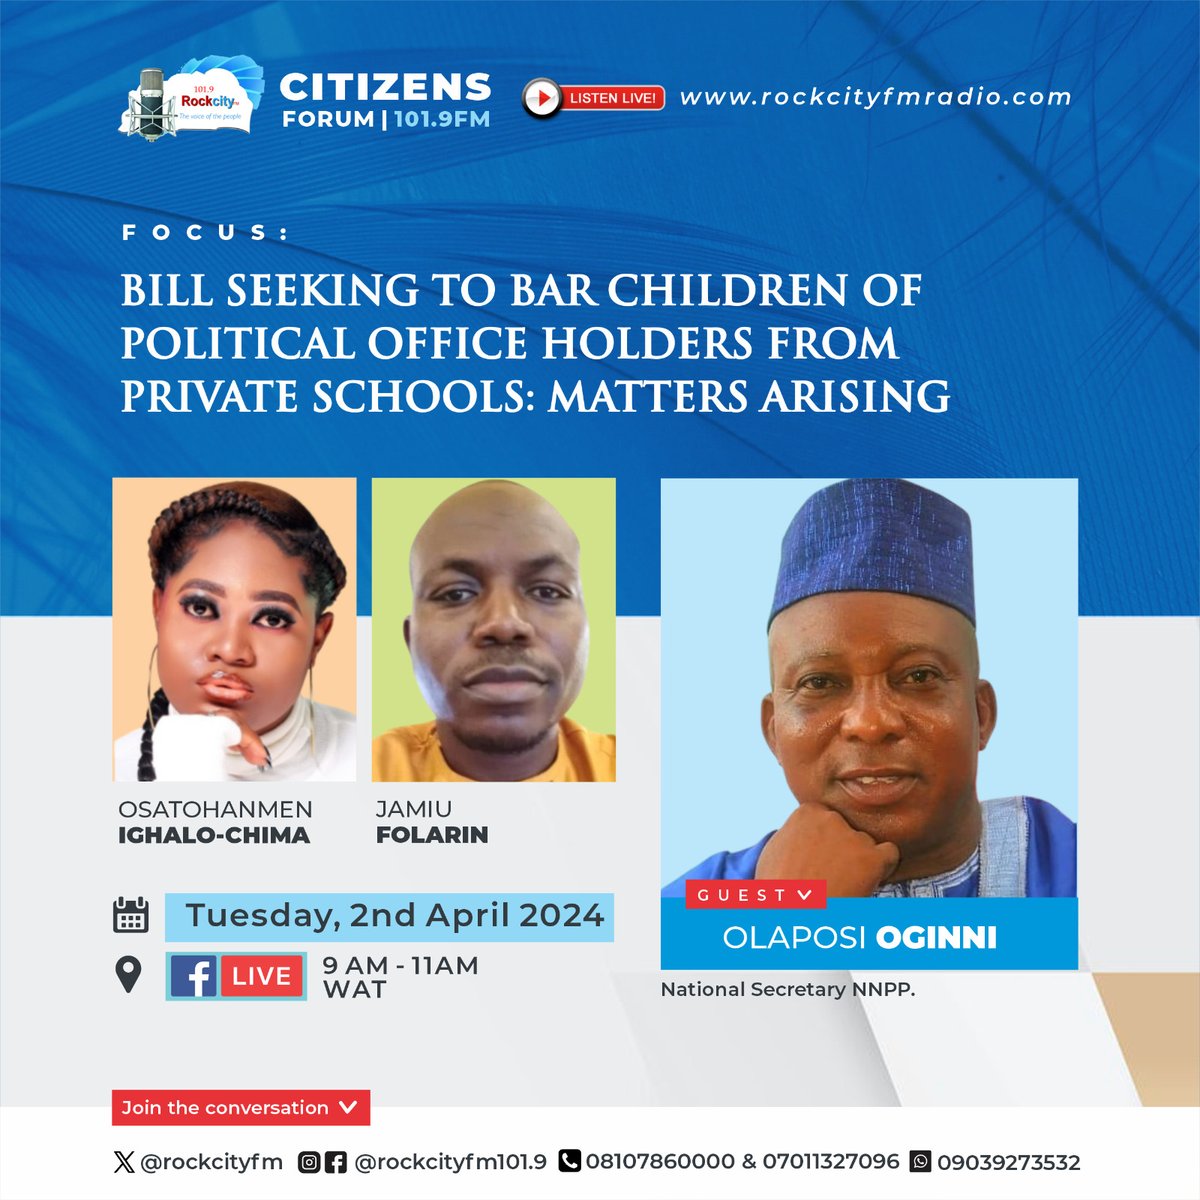 Join us on Tues 2nd, April at 9a.m. on #CitizensForum #DaybreakShow

FOCUS: BILL SEEKING TO BAR CHILDREN OF POLITICAL OFFICE HOLDERS FROM PRIVATE SCHOOLS: MATTERS ARISING

Guest: Olaposi Oginni

Hosts: @_radiopepper & @GERMANEO

Live: rockcityfmradio.com

#MattersArising